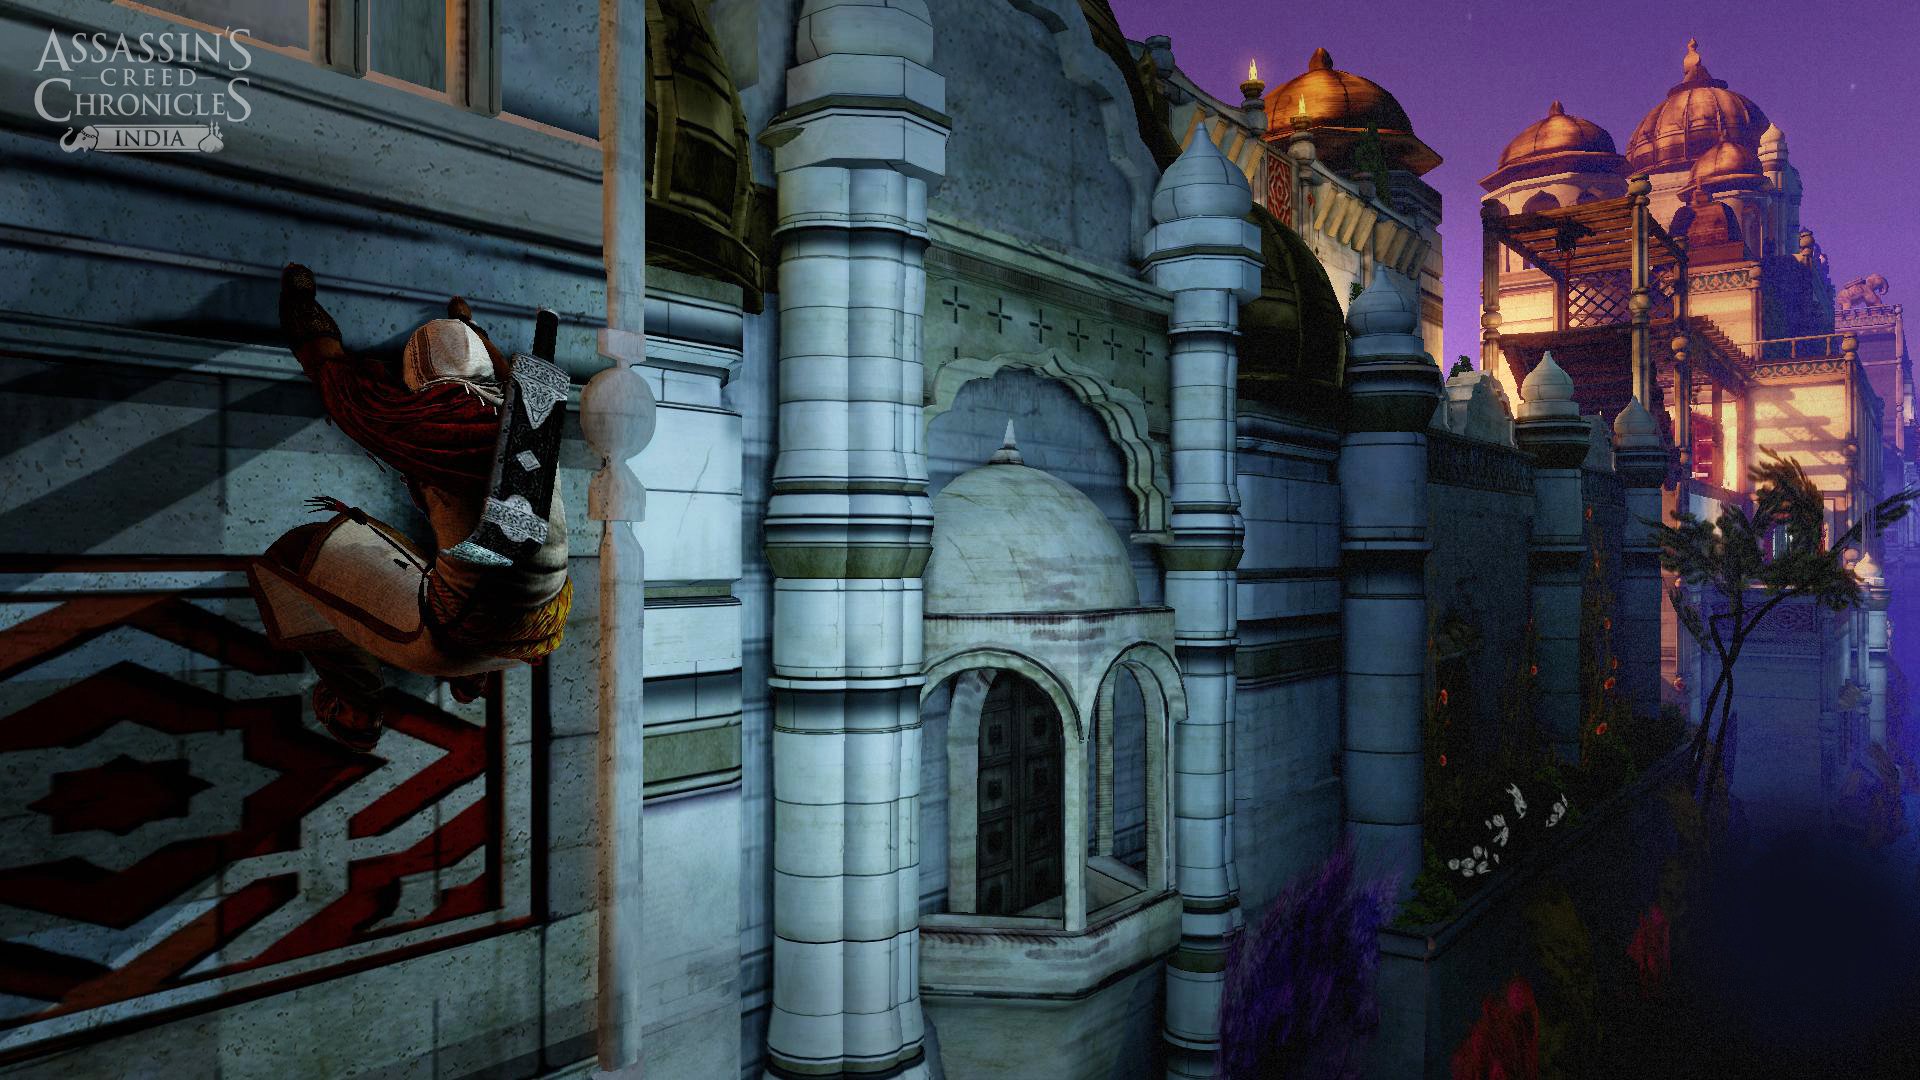 Assassin's Creed Chronicles: India | Offizielle Screenshots